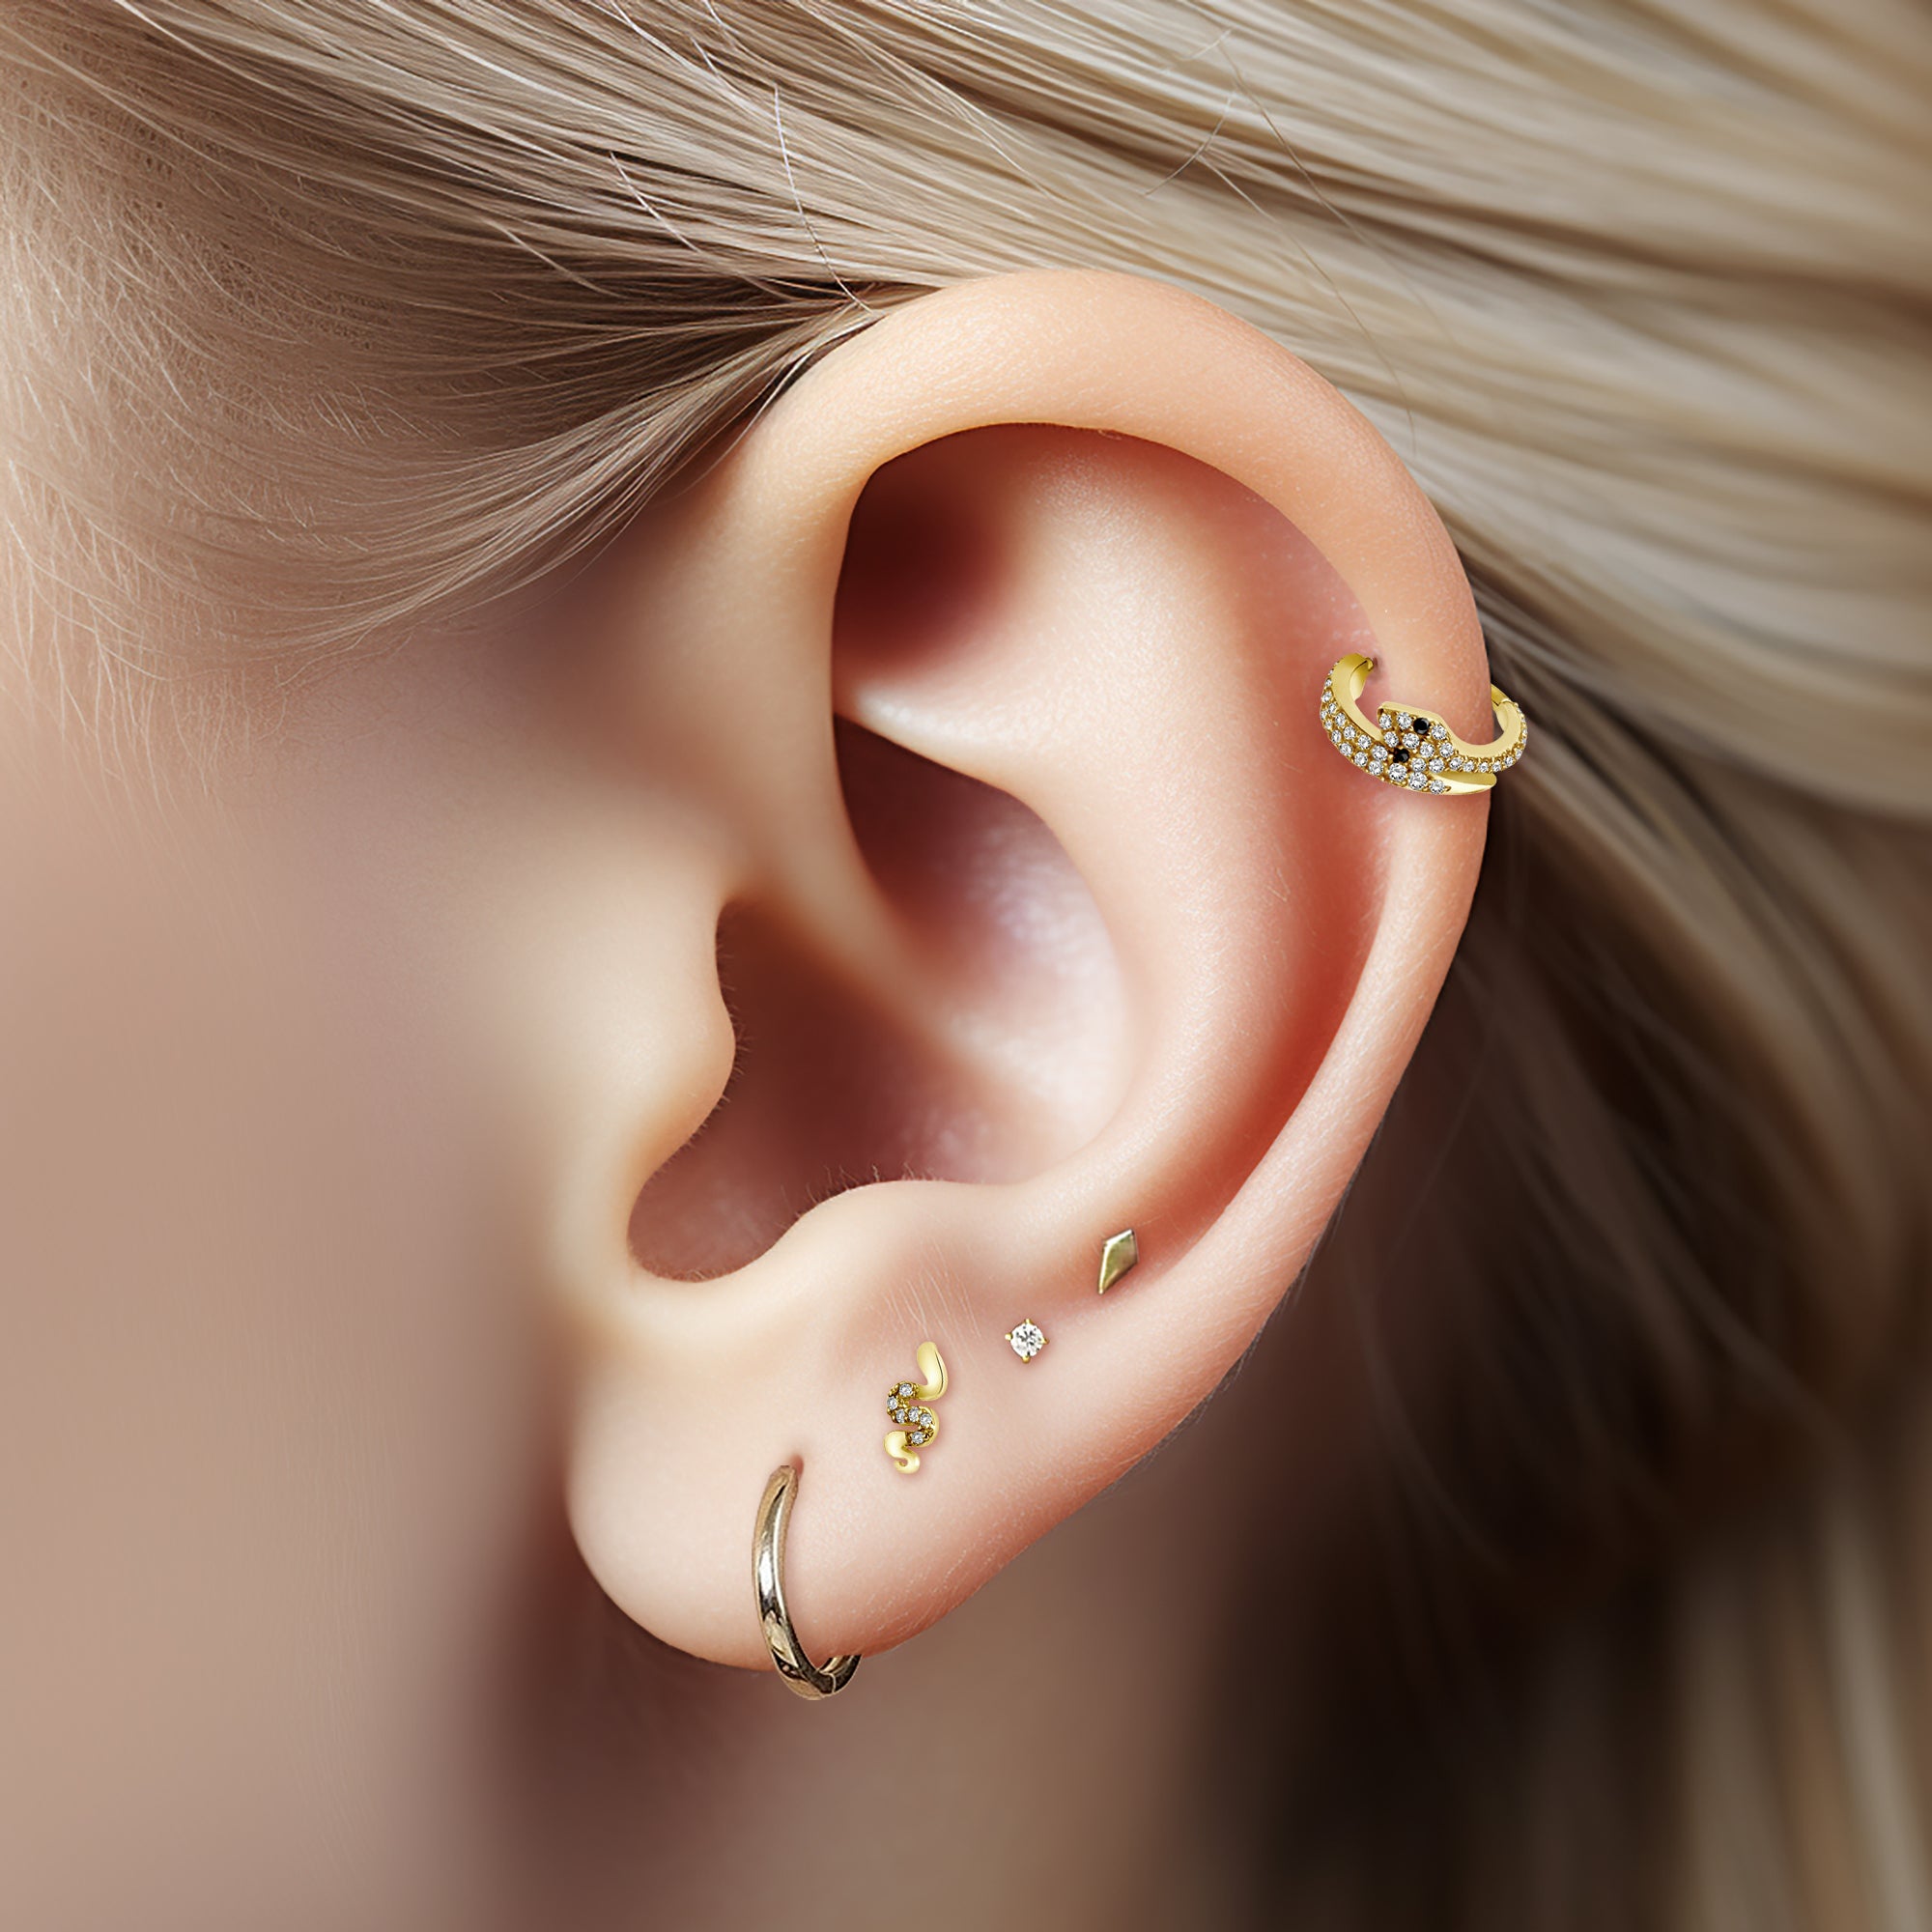 Silver ear stud with snake and gems